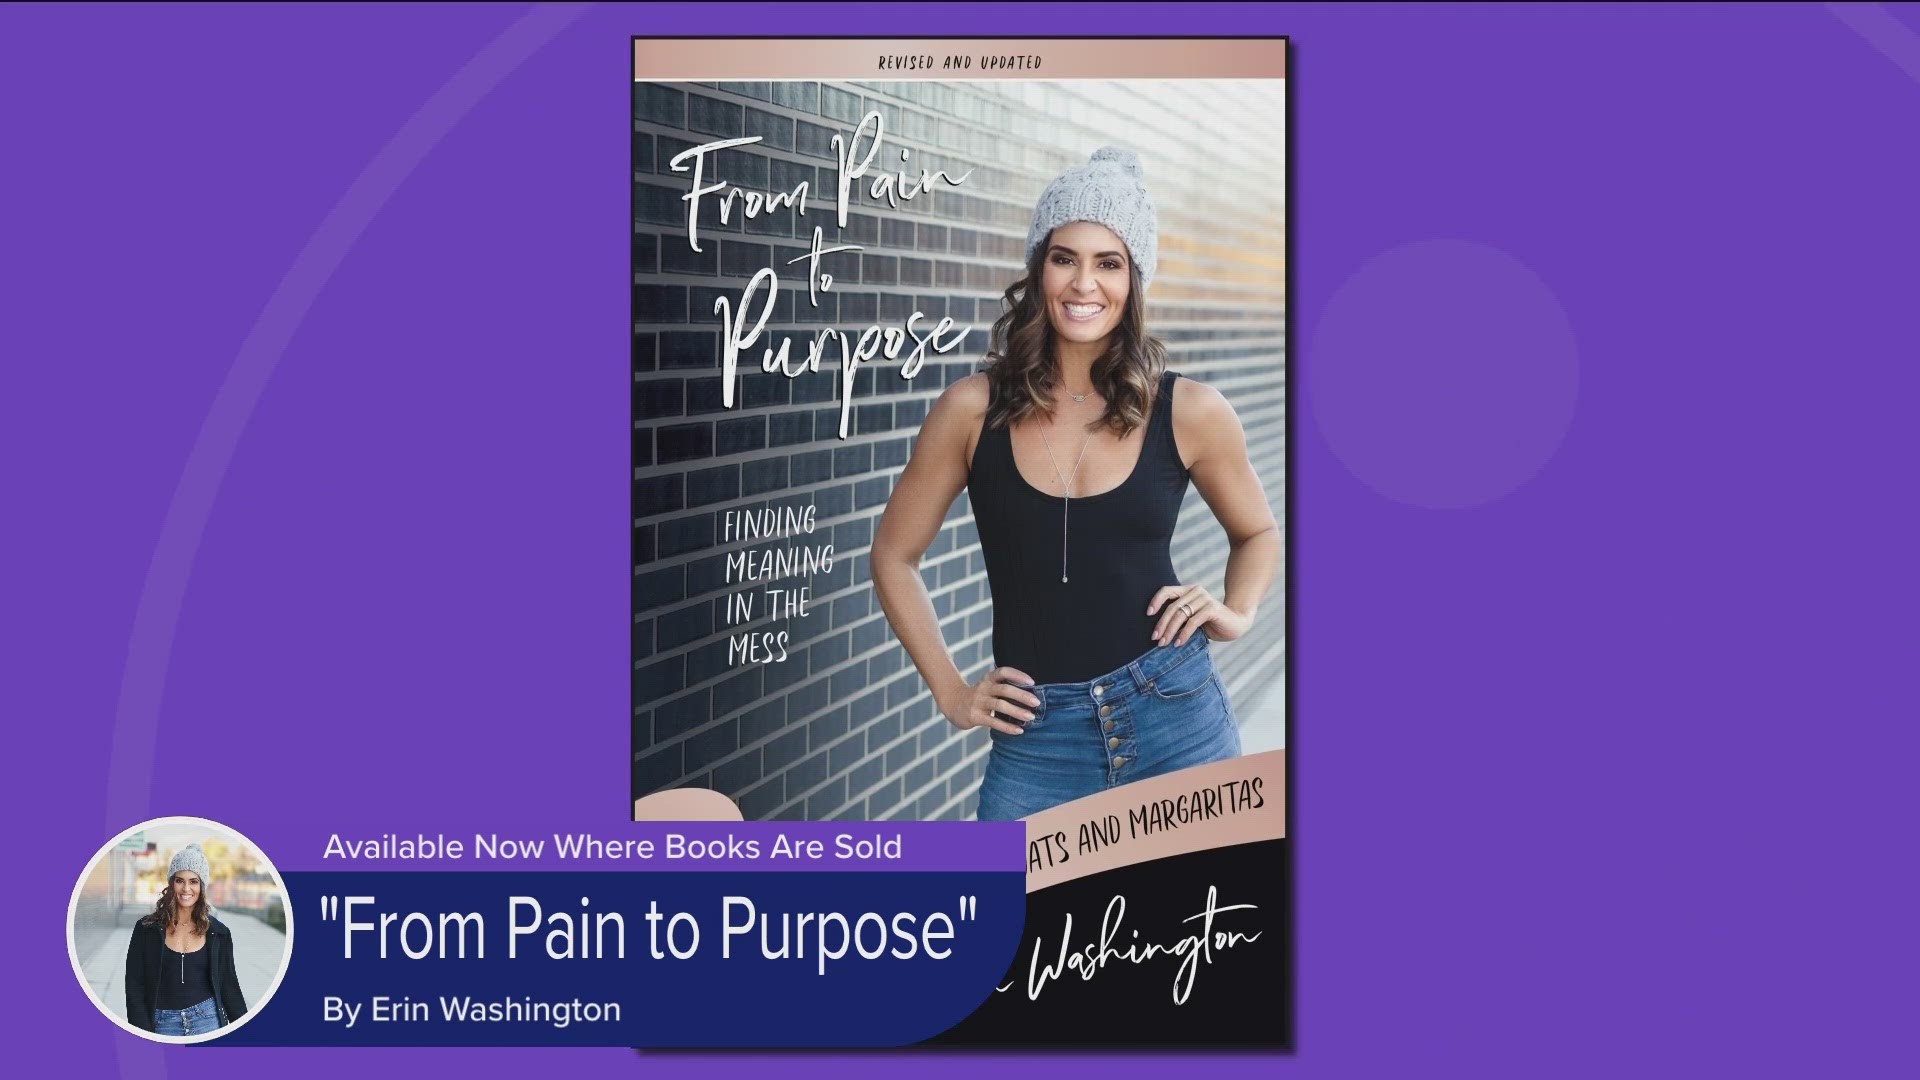 "From Pain to Purpose" is available now, wherever books are sold.